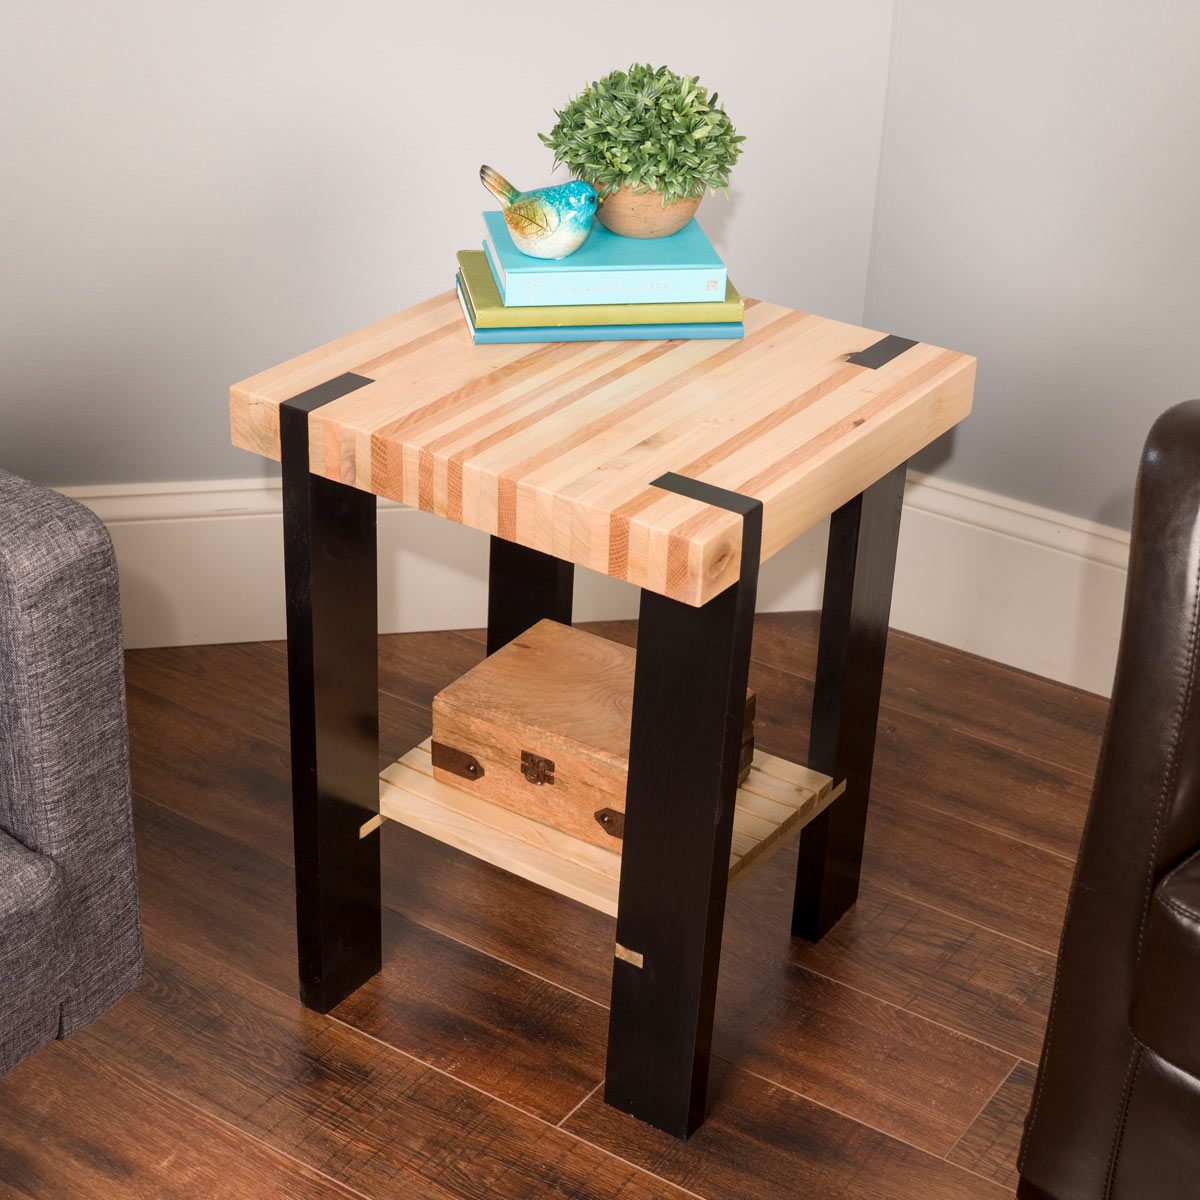 Saturday Morning Workshop: How To Build A Pallet Side Table